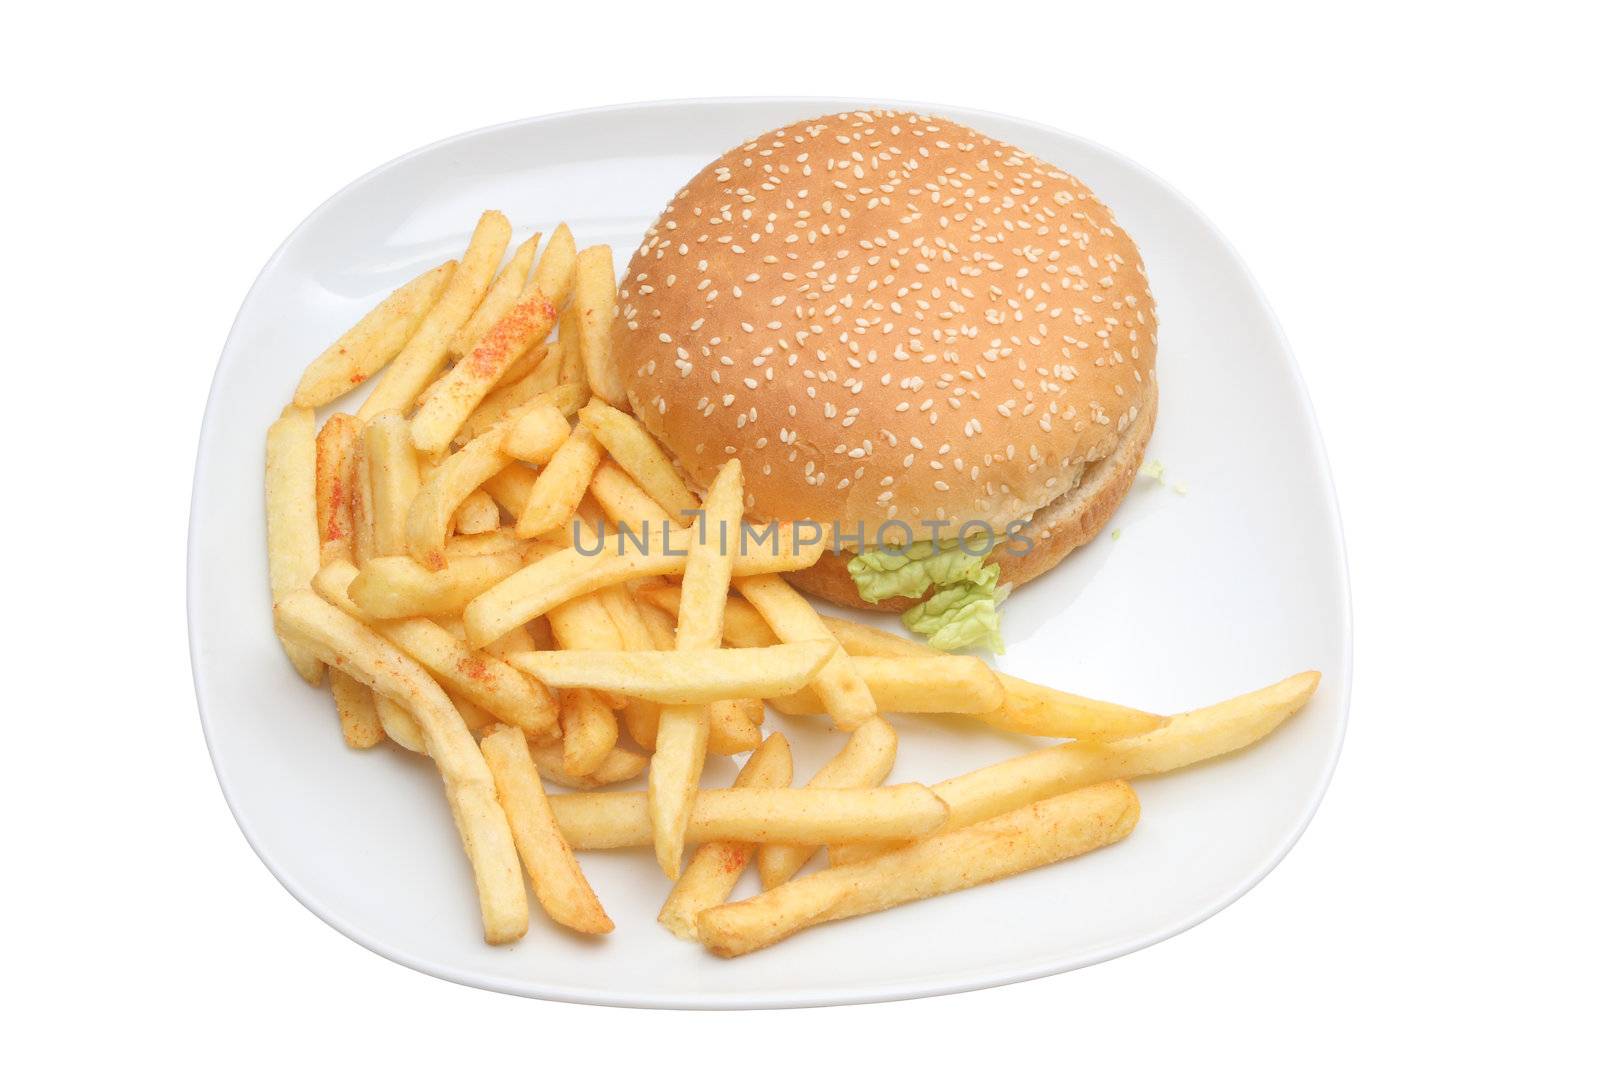 Hamburger and fries on white, on white dish, very tasty looking